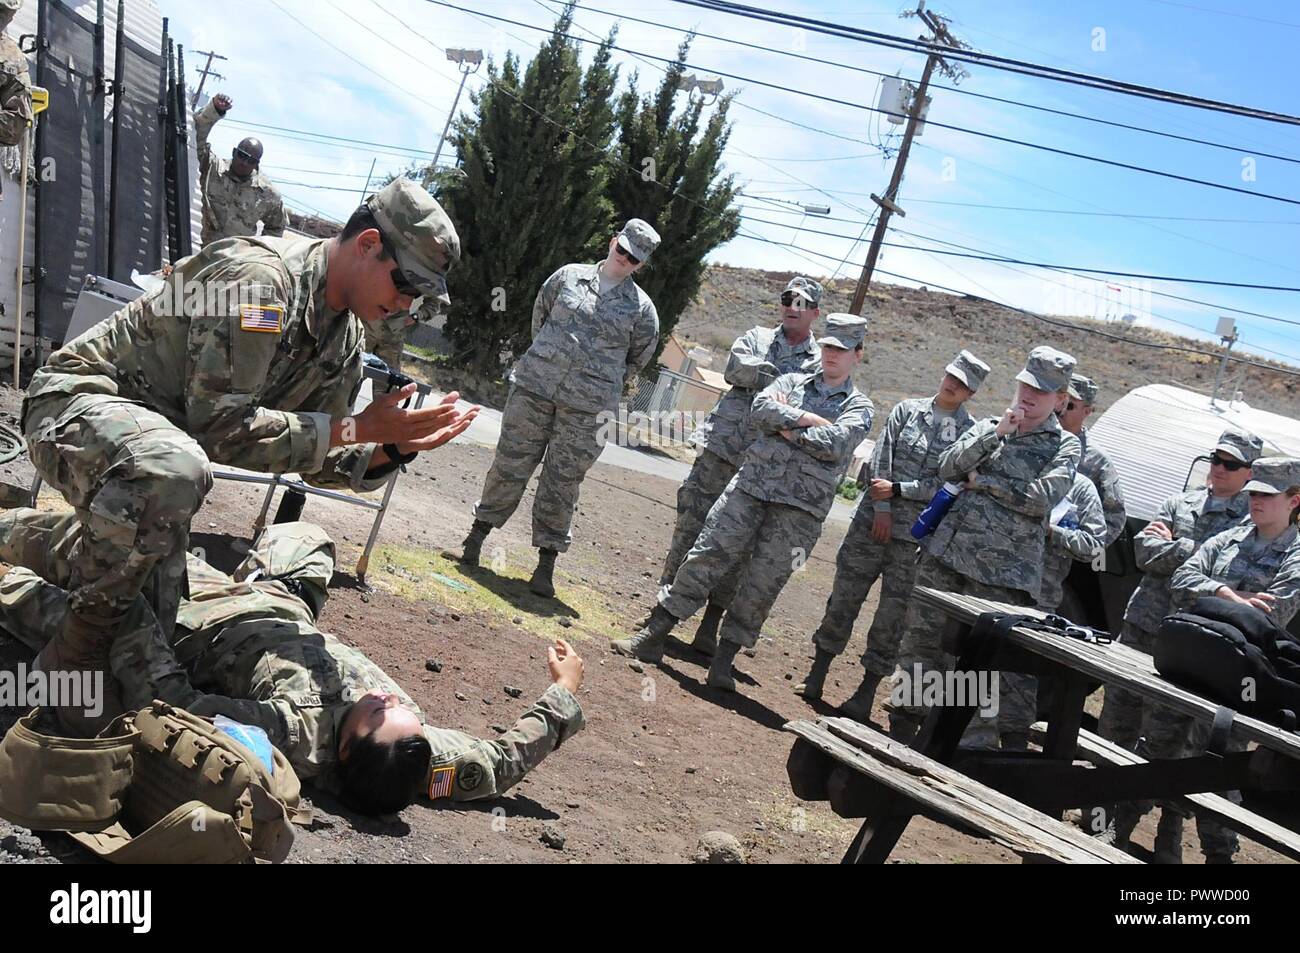 An Army medic provides first-responder casualty training to Airmen from the 178th Medical Group and 121st Medical Group during a joint medical training at the Pohakuloa Training Area, Hawaii. Thirty-three Airmen participated in the training, provided real-world medical assistance and completed their annual training requirements, June 11-23. Stock Photo